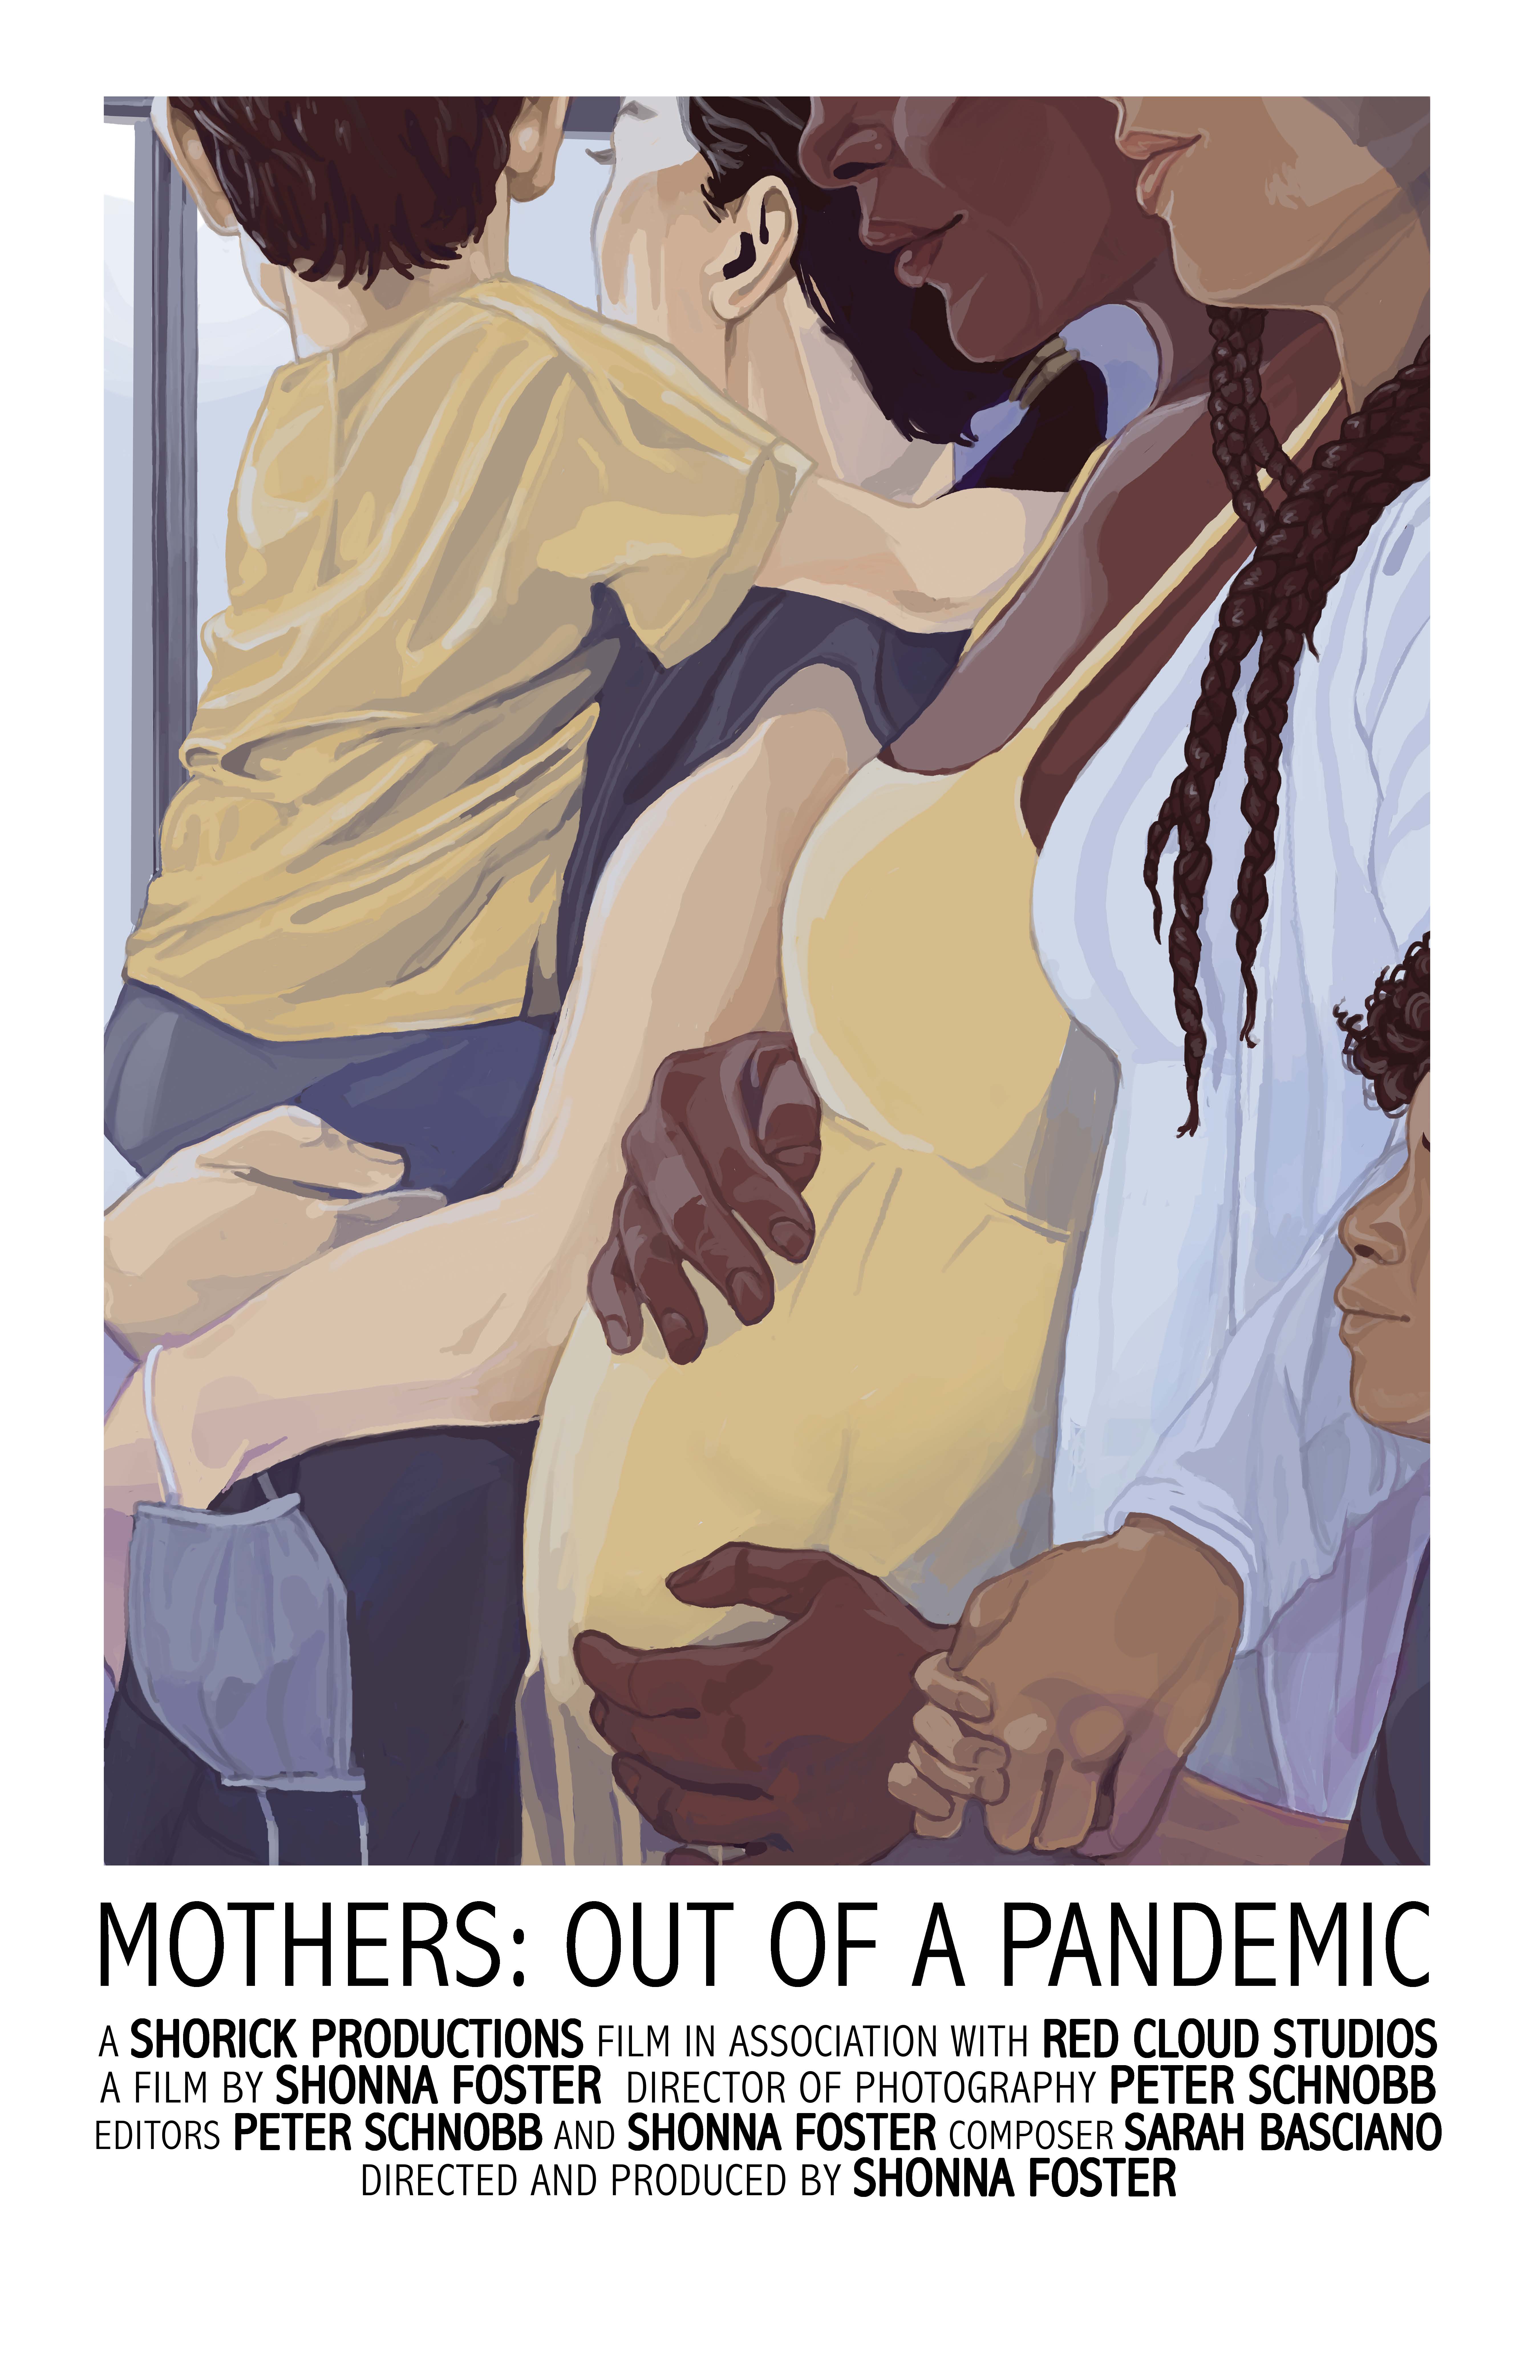 Mothers: Out of A Pandemic